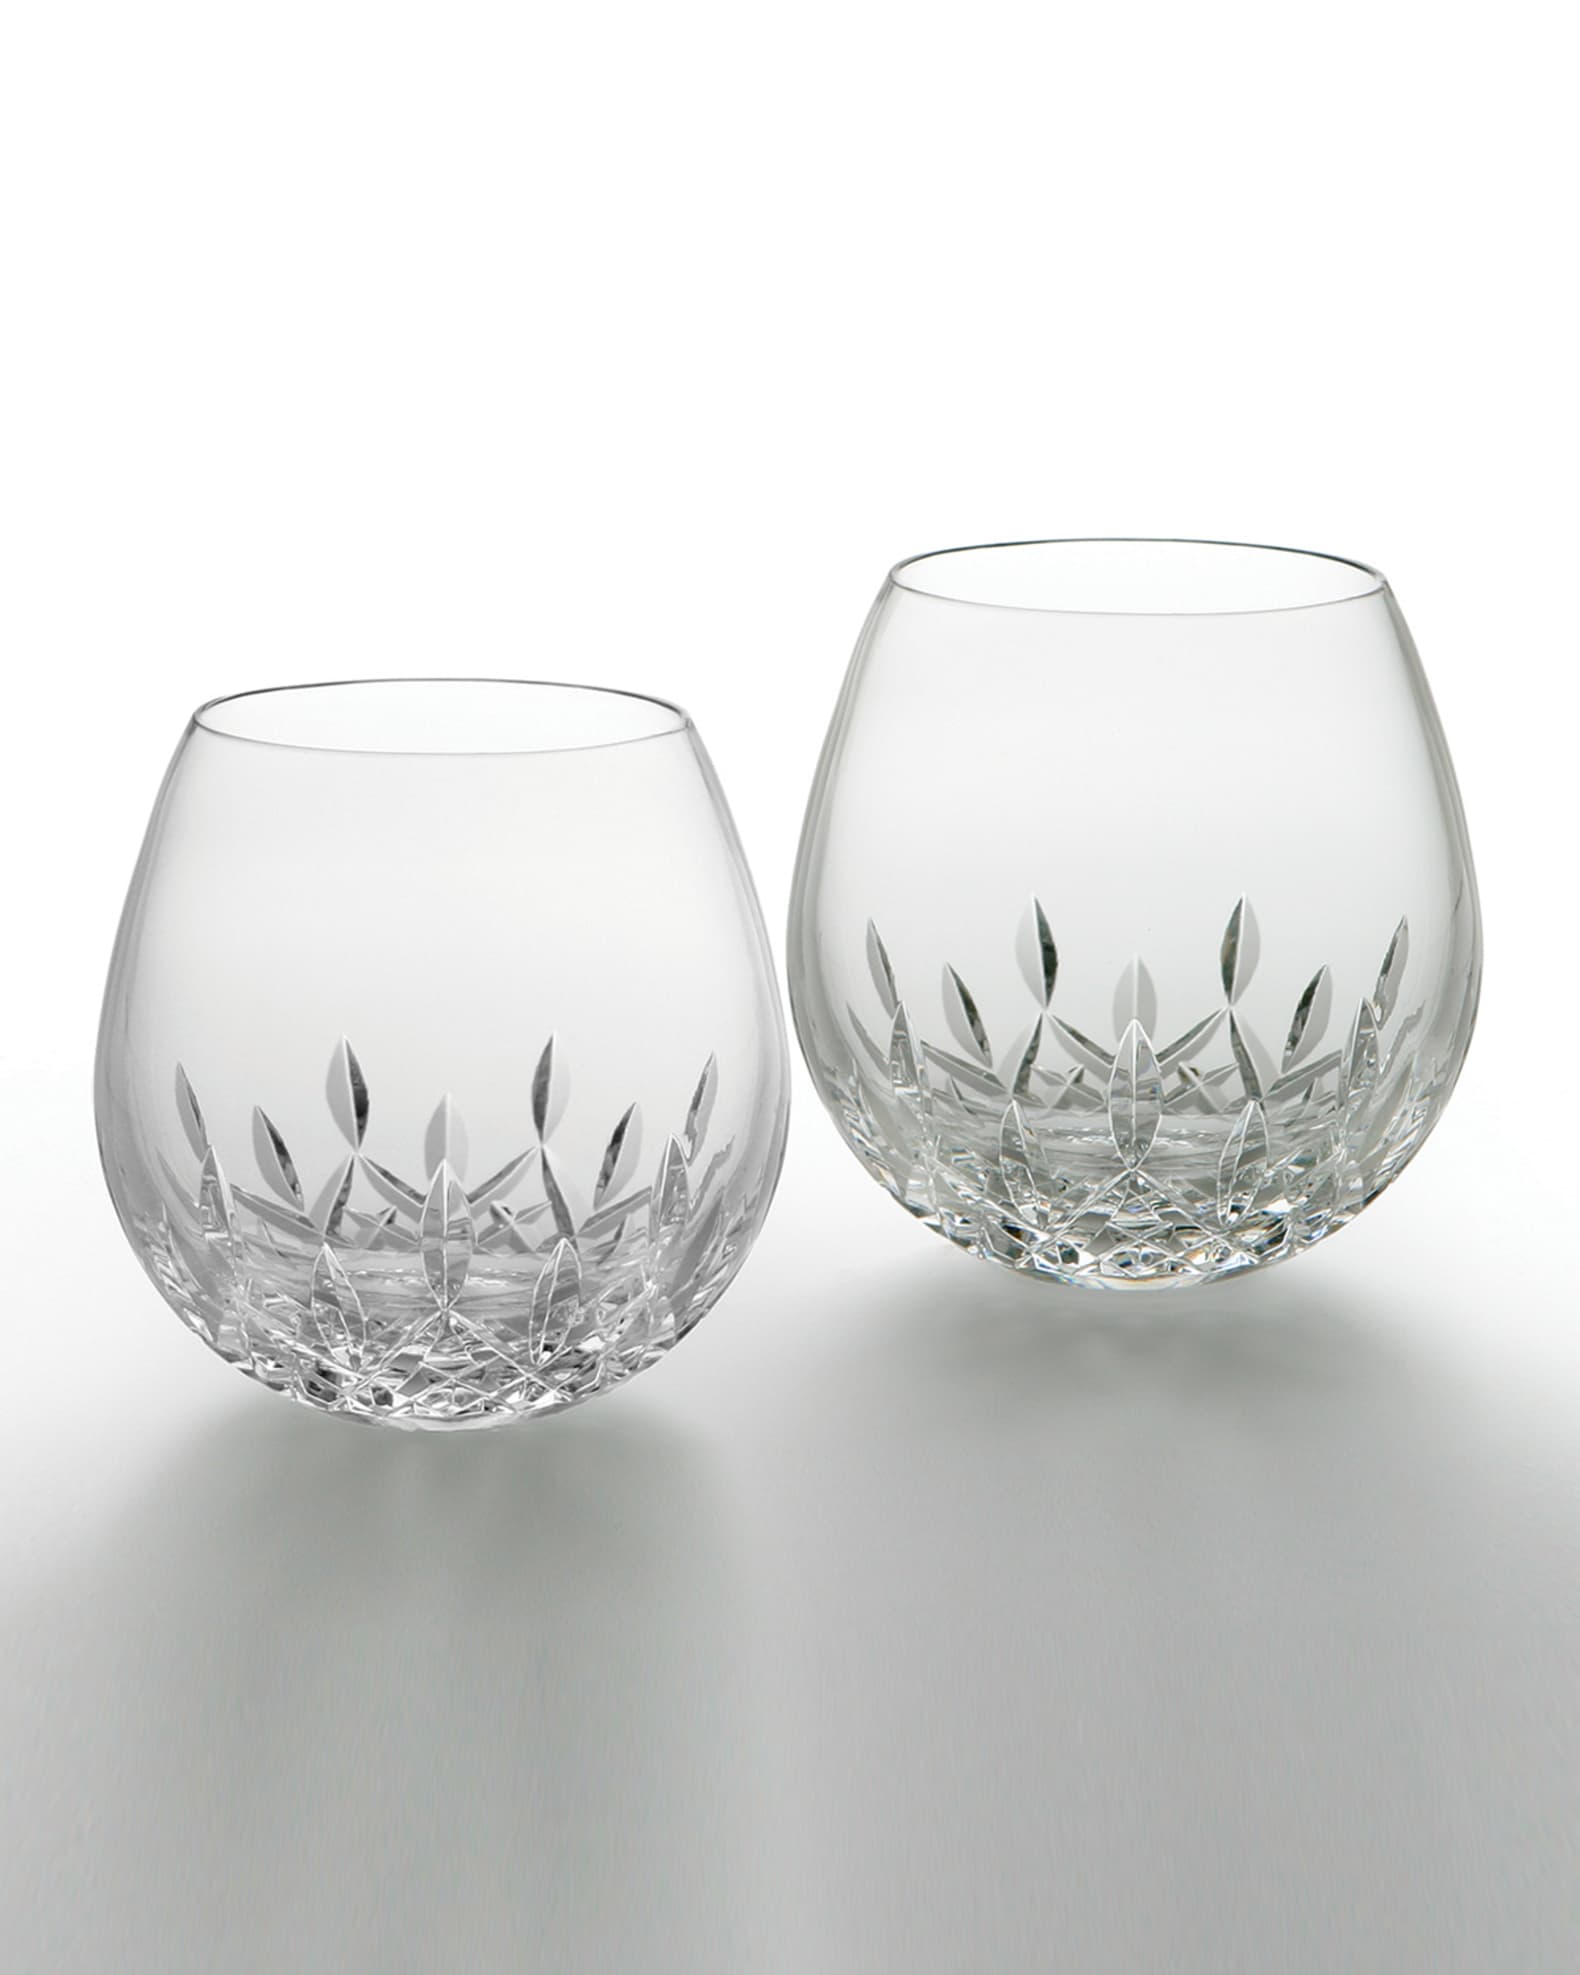 Waterford Lismore Essence White Wine Glasses, Set of 2